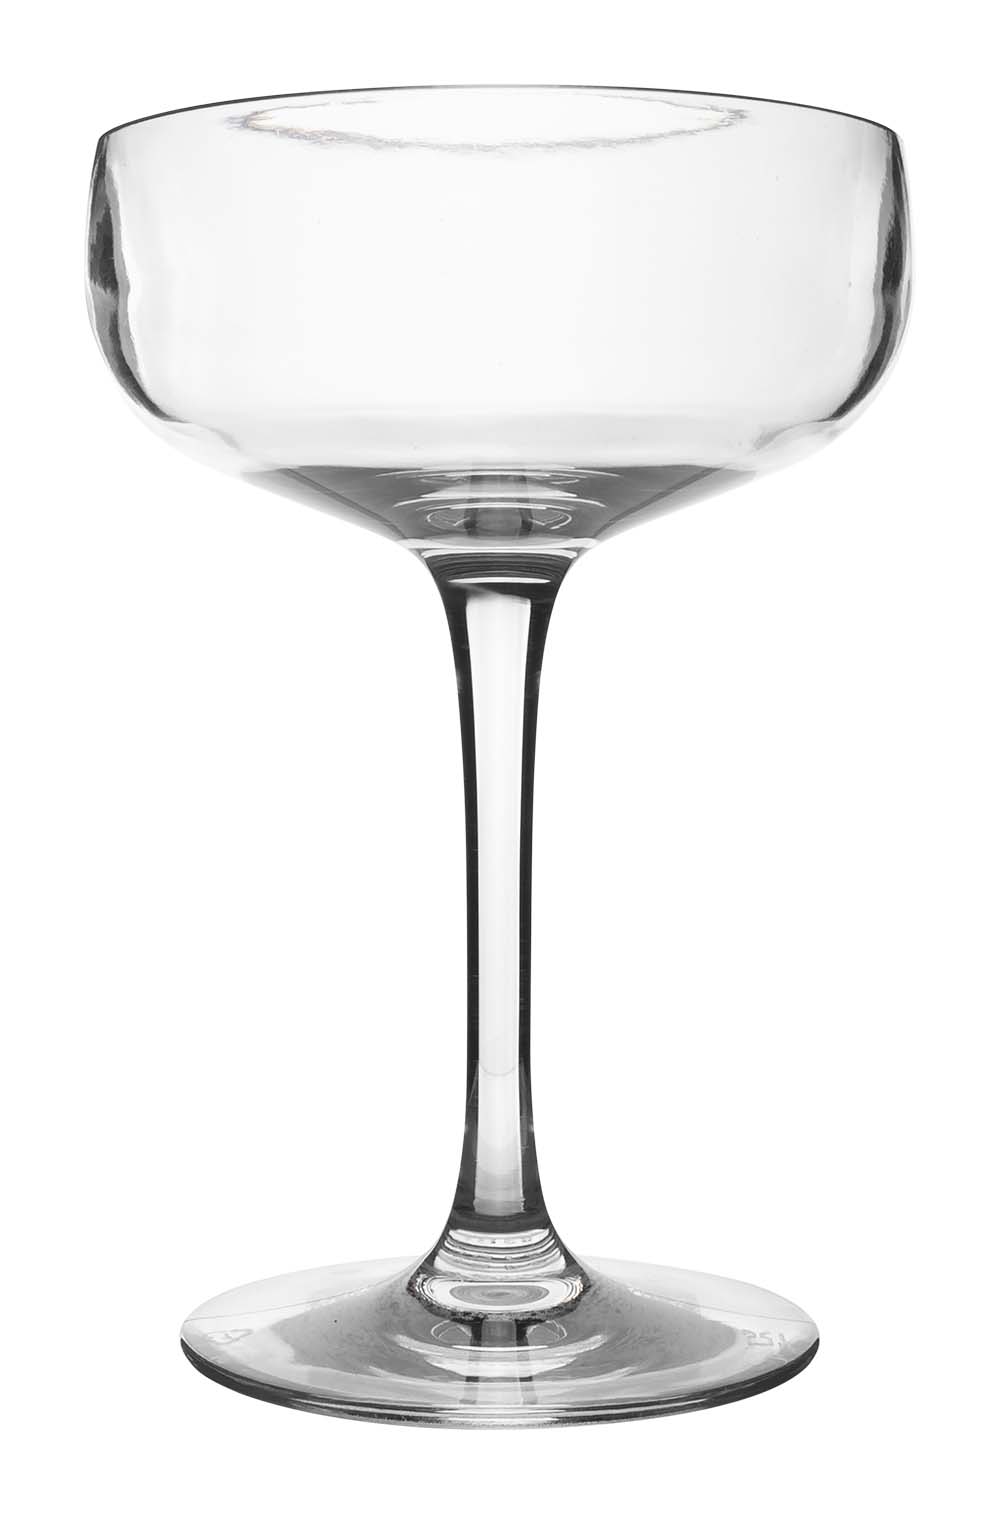 6101435 An extra sturdy and stylish cocktail glass. Made of 100% polycarbonate This makes the glasses almost unbreakable, light weight and scratch proof. This glass is also dishwasher safe.